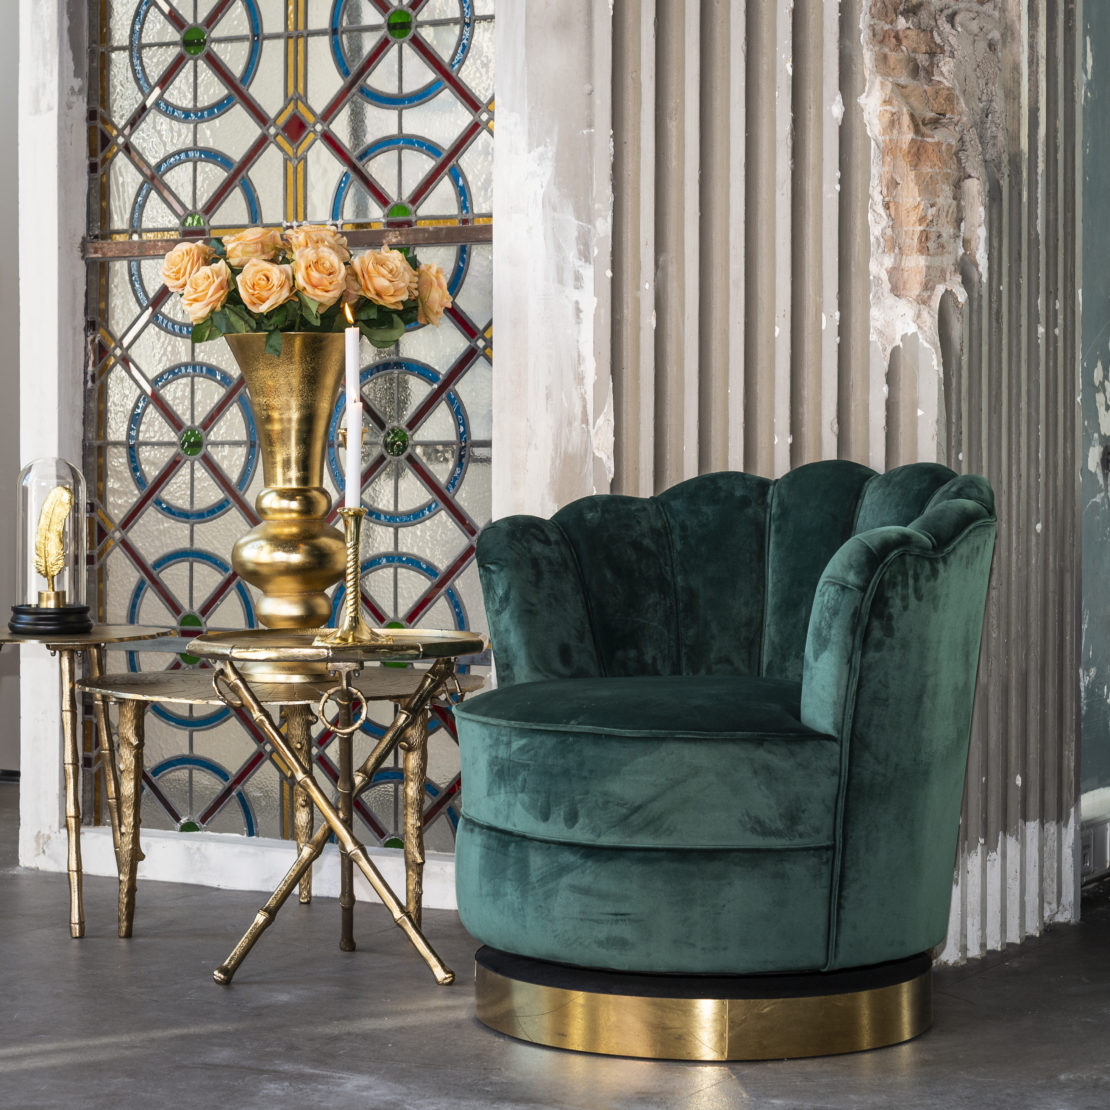 Gold and green 2023 interior design trend furnishings.